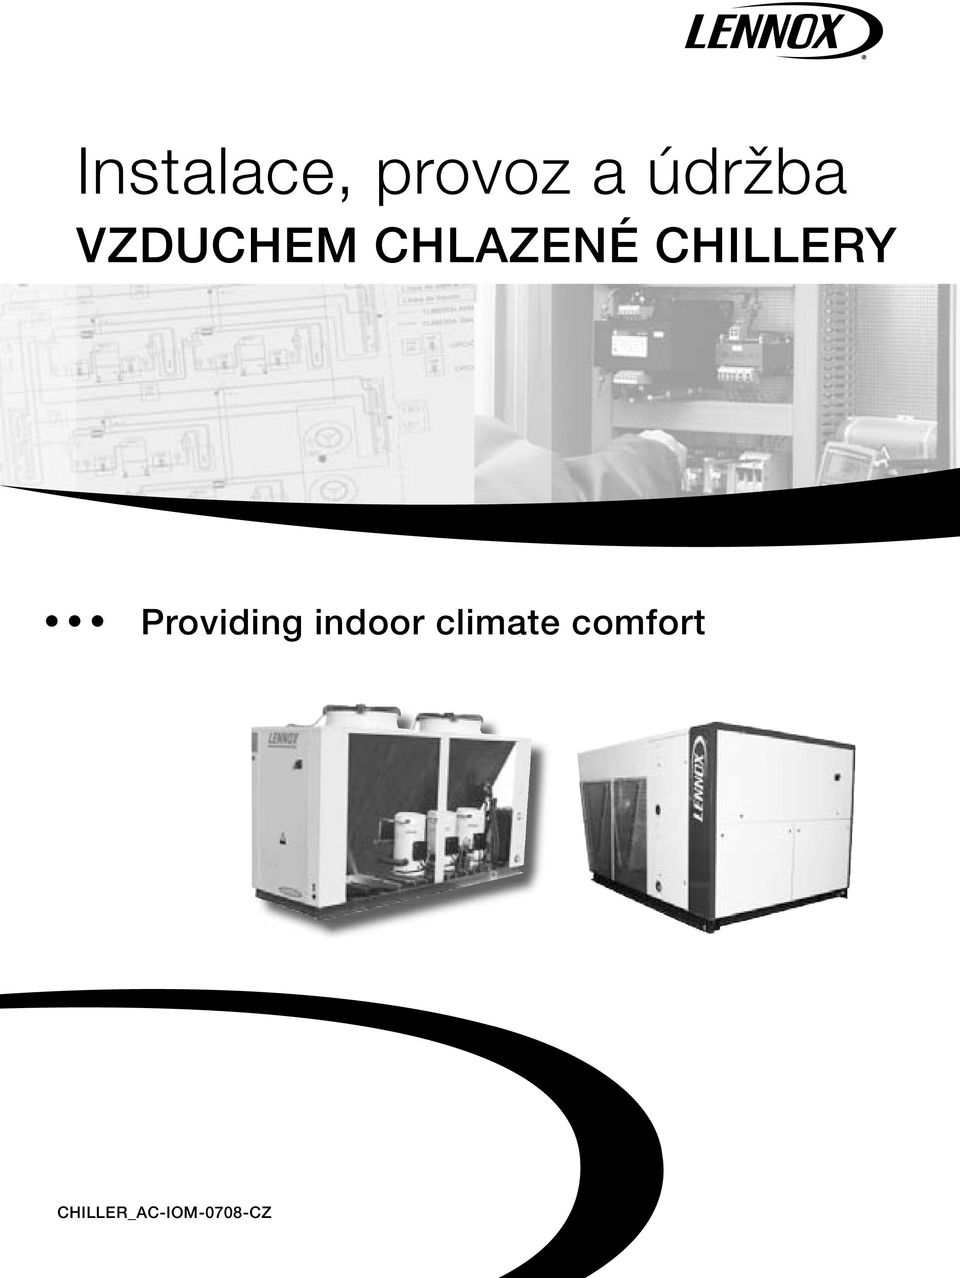 Providing indoor climate